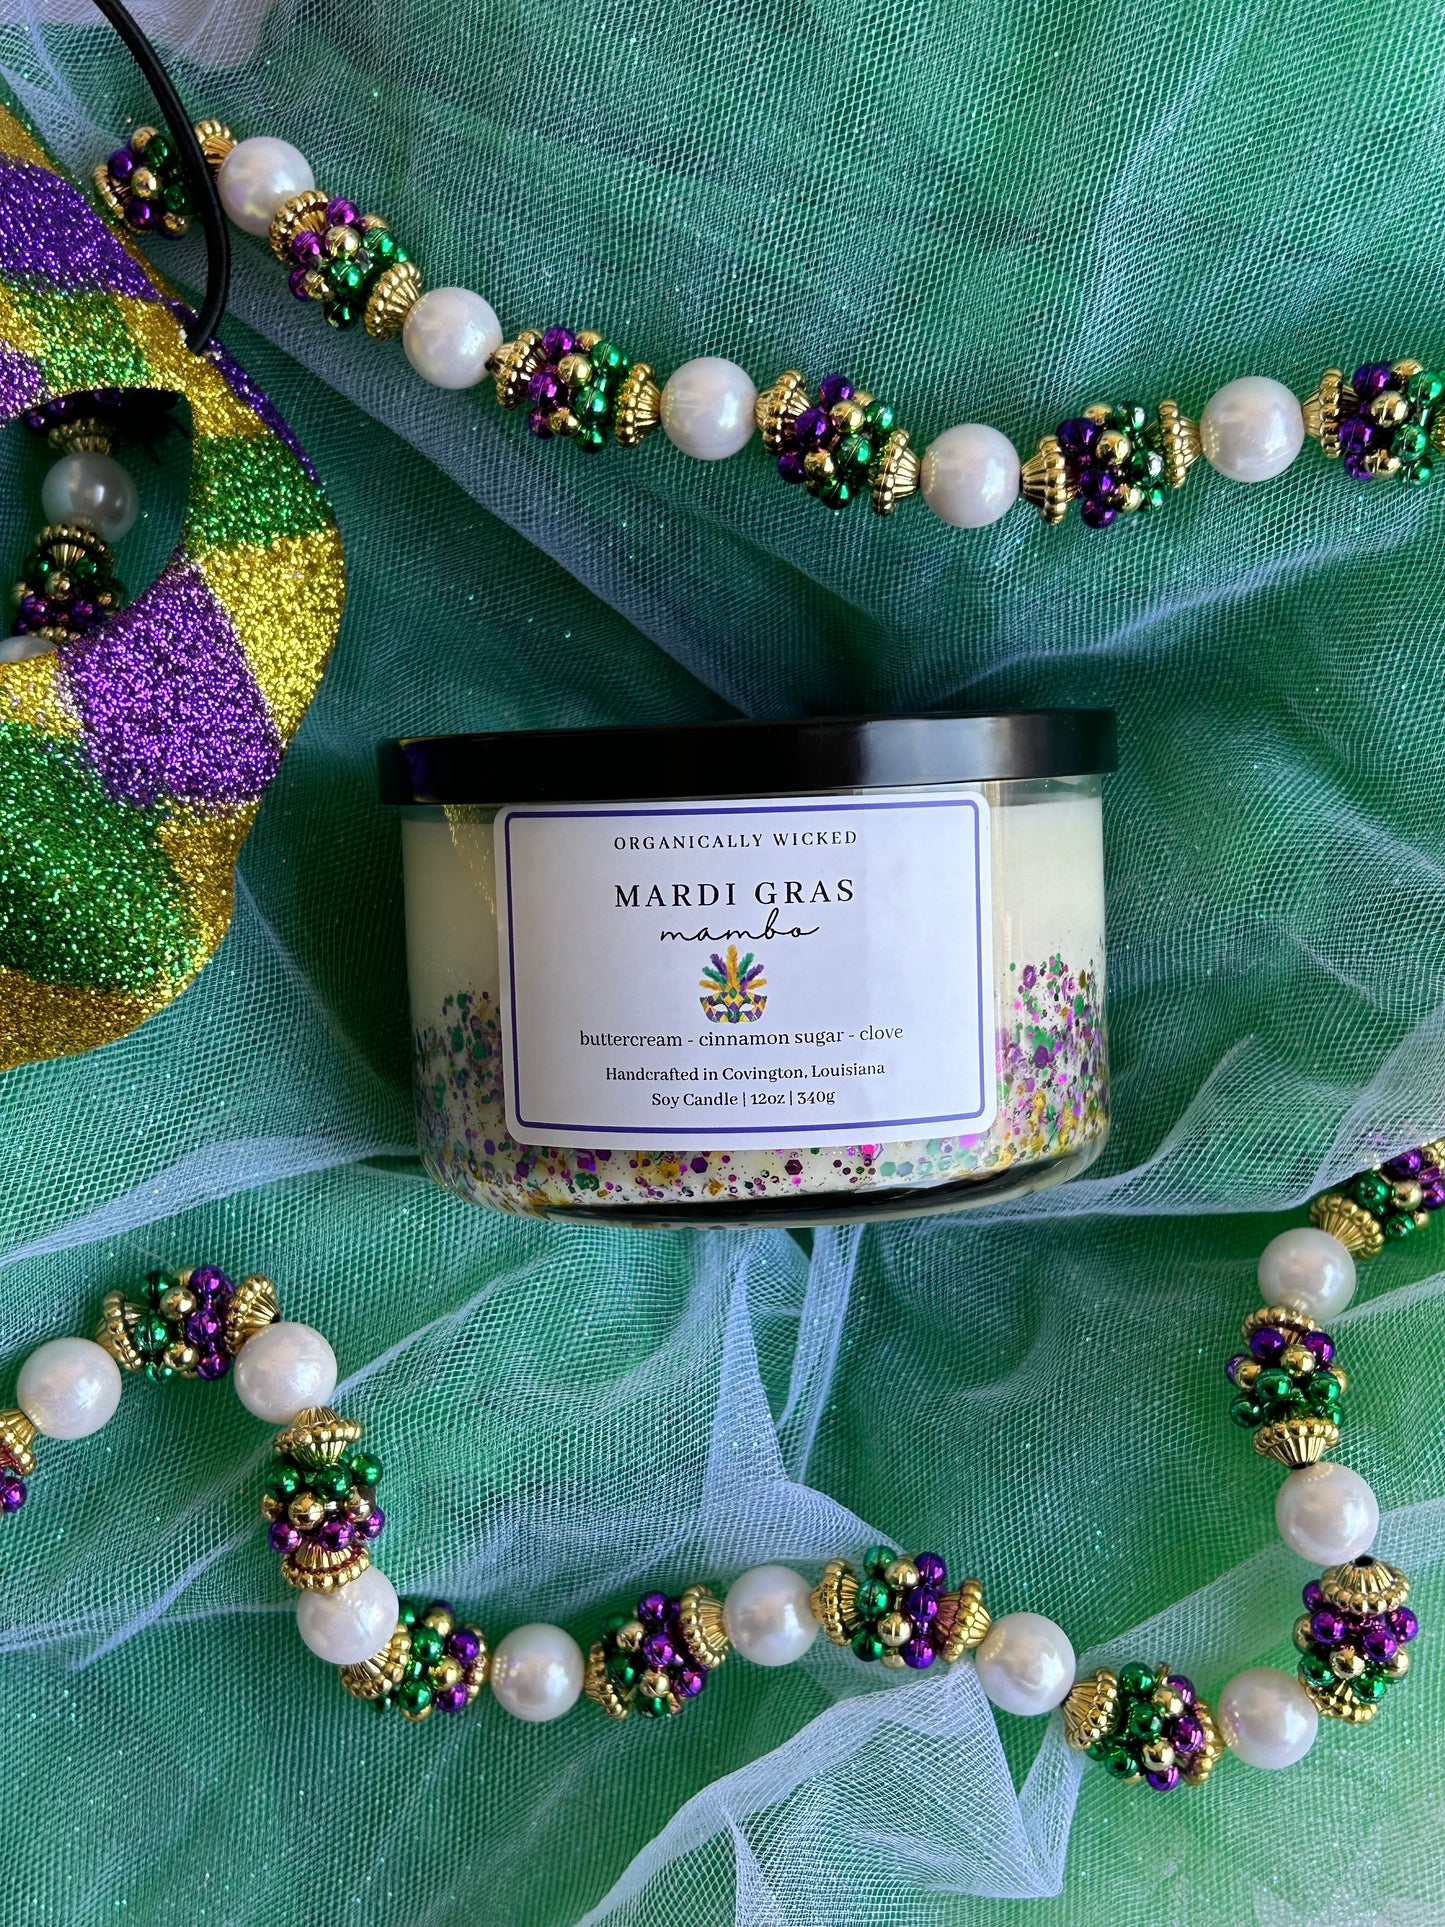 Double Wicked Soy Candle w/ Glitter - 12oz